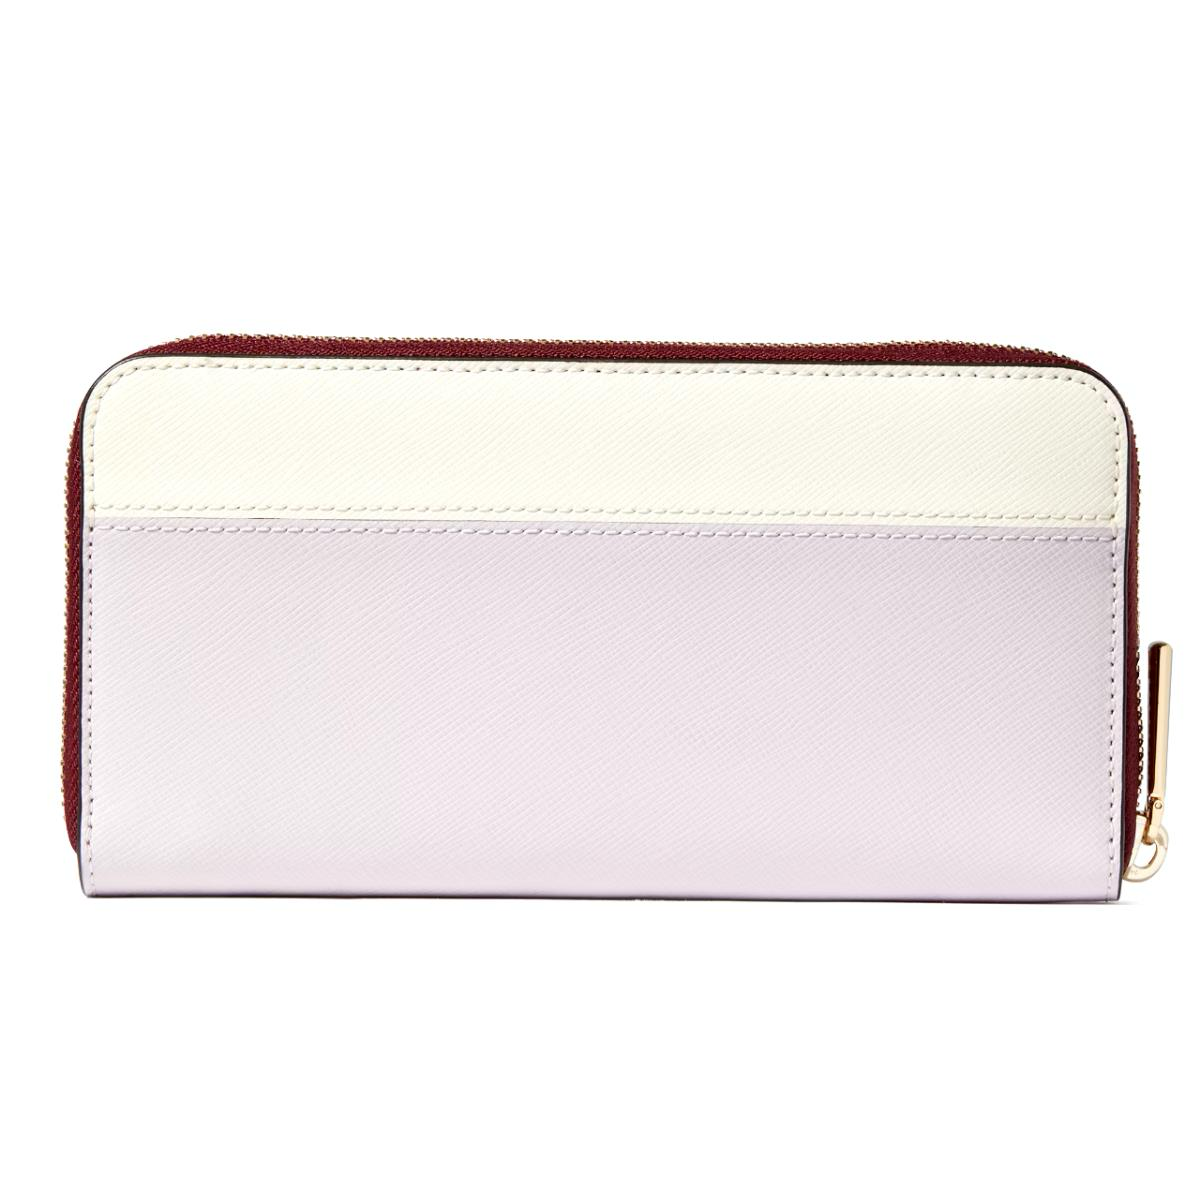 KS Madison Large Continental Wallet in Lilac Moonlight Multi (KC509)